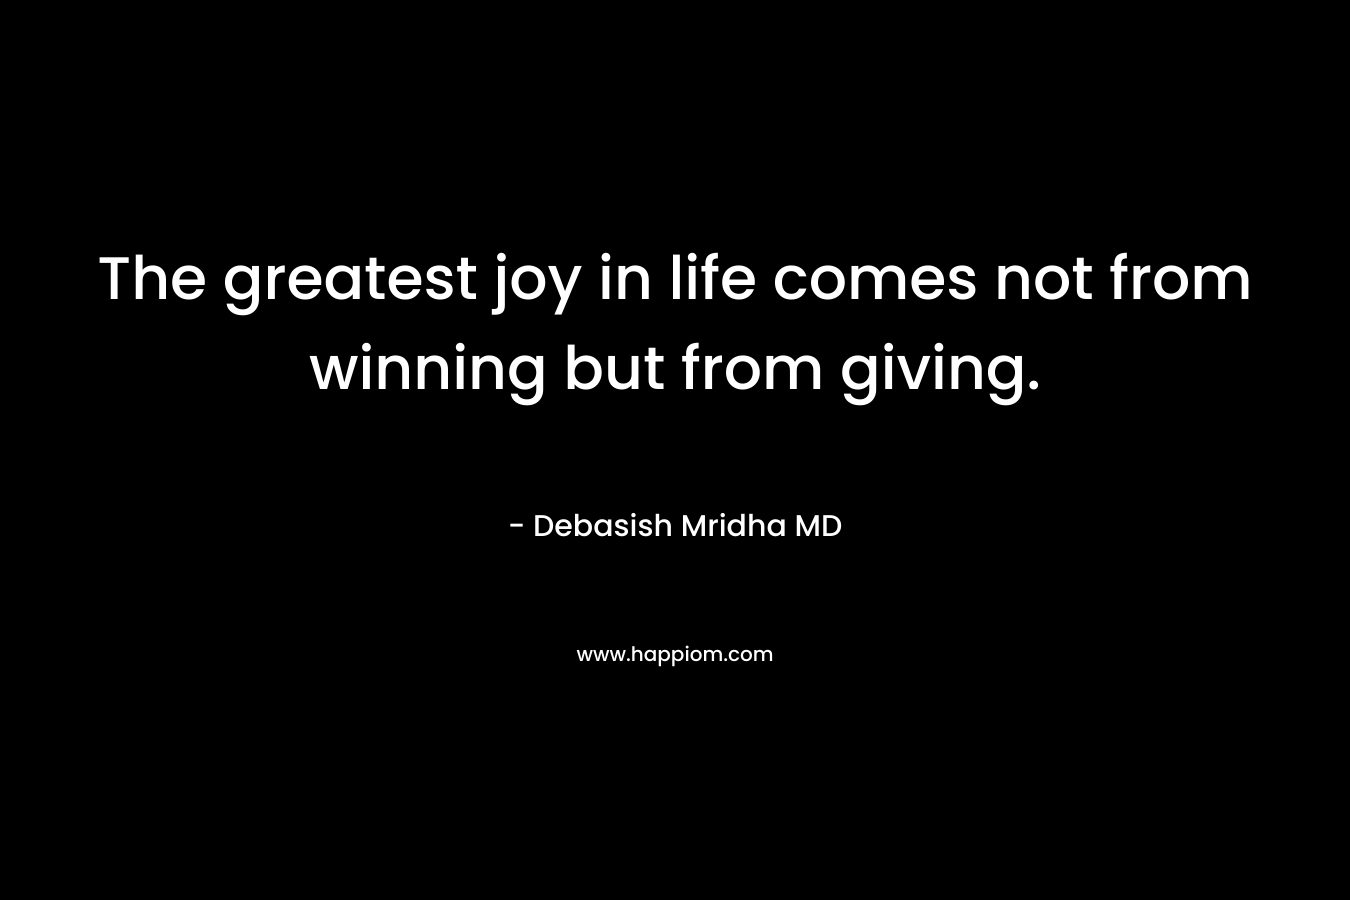 The greatest joy in life comes not from winning but from giving.